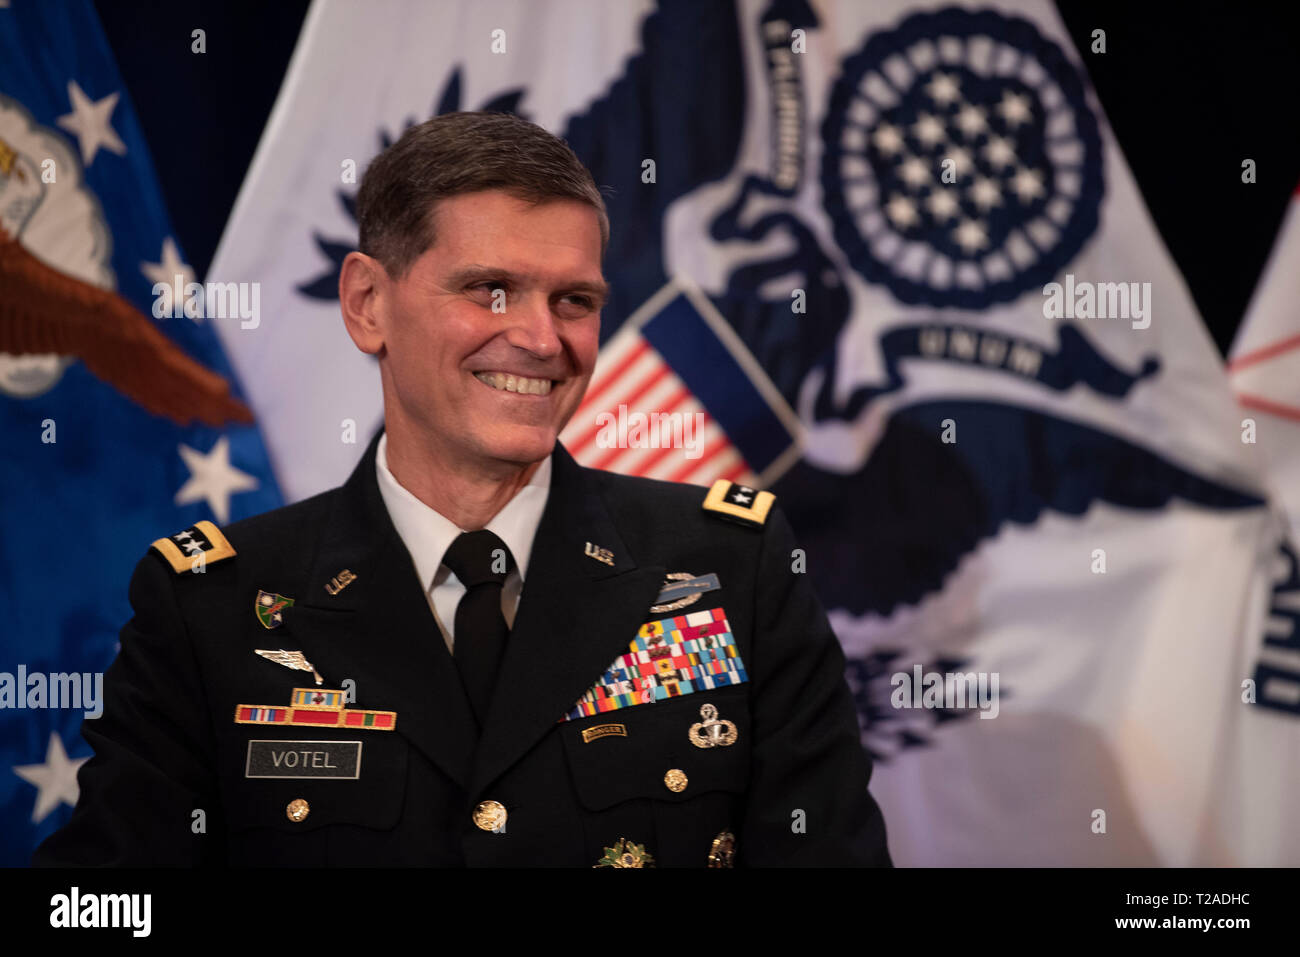 The outgoing commander of U.S. Central Command, General Joseph L. Votel, smiles during his retirement ceremony at Macdill Air Force Base March 29, 2019 in Tampa, Florida. Votel retired after 39 years of military service. Stock Photo